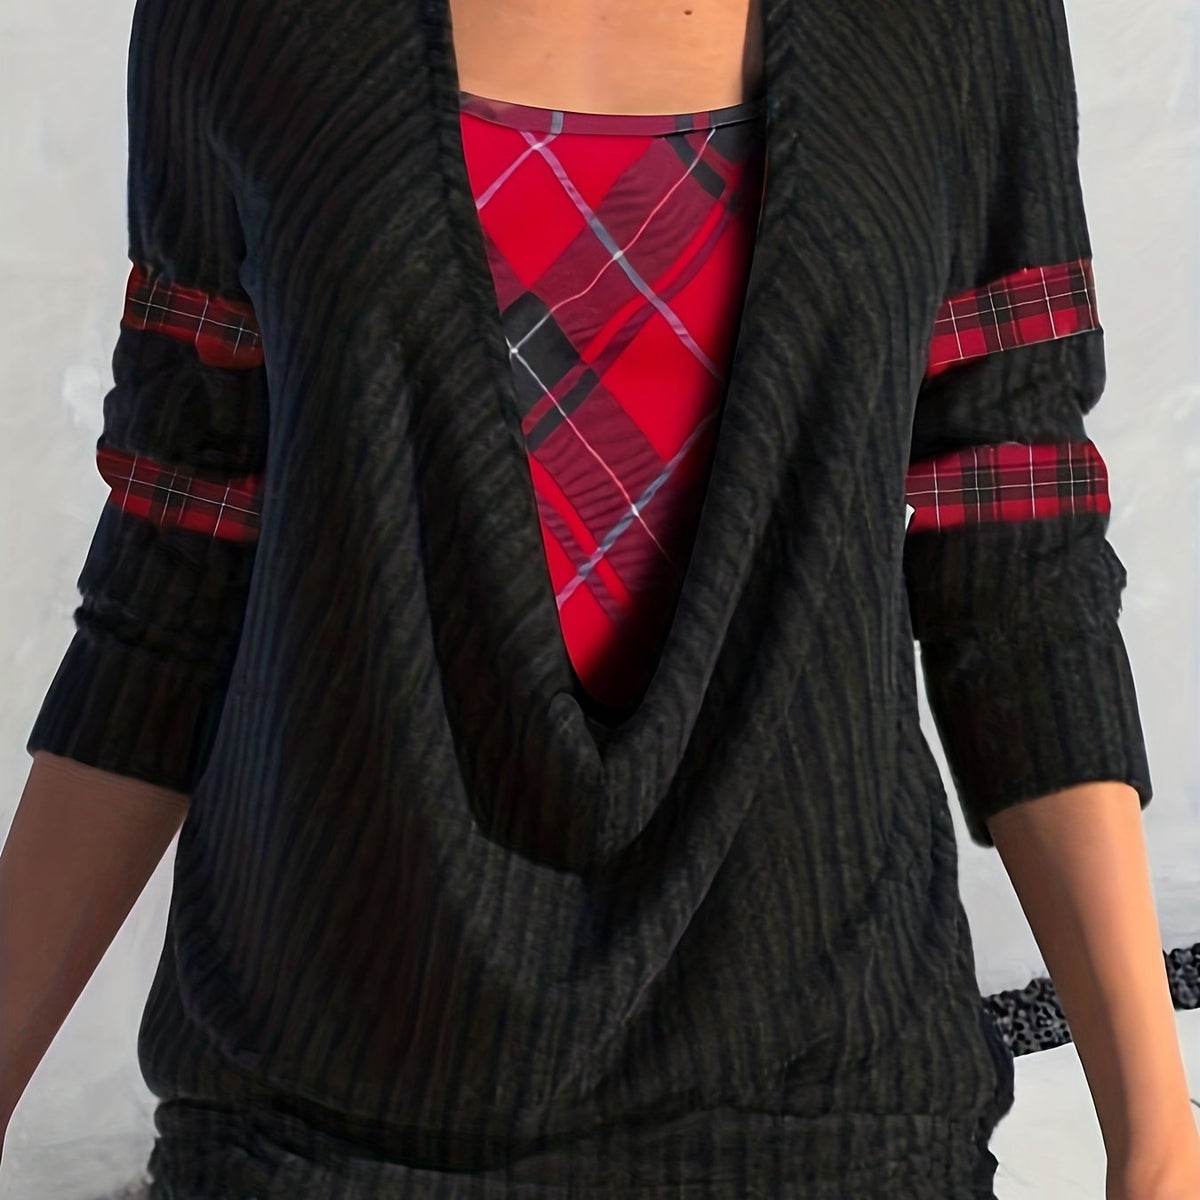 Plus Size Casual Top, Women's Plus Colorblock Plaid Print Ribbed Long Sleeve Cowl Neck Medium Stretch Top